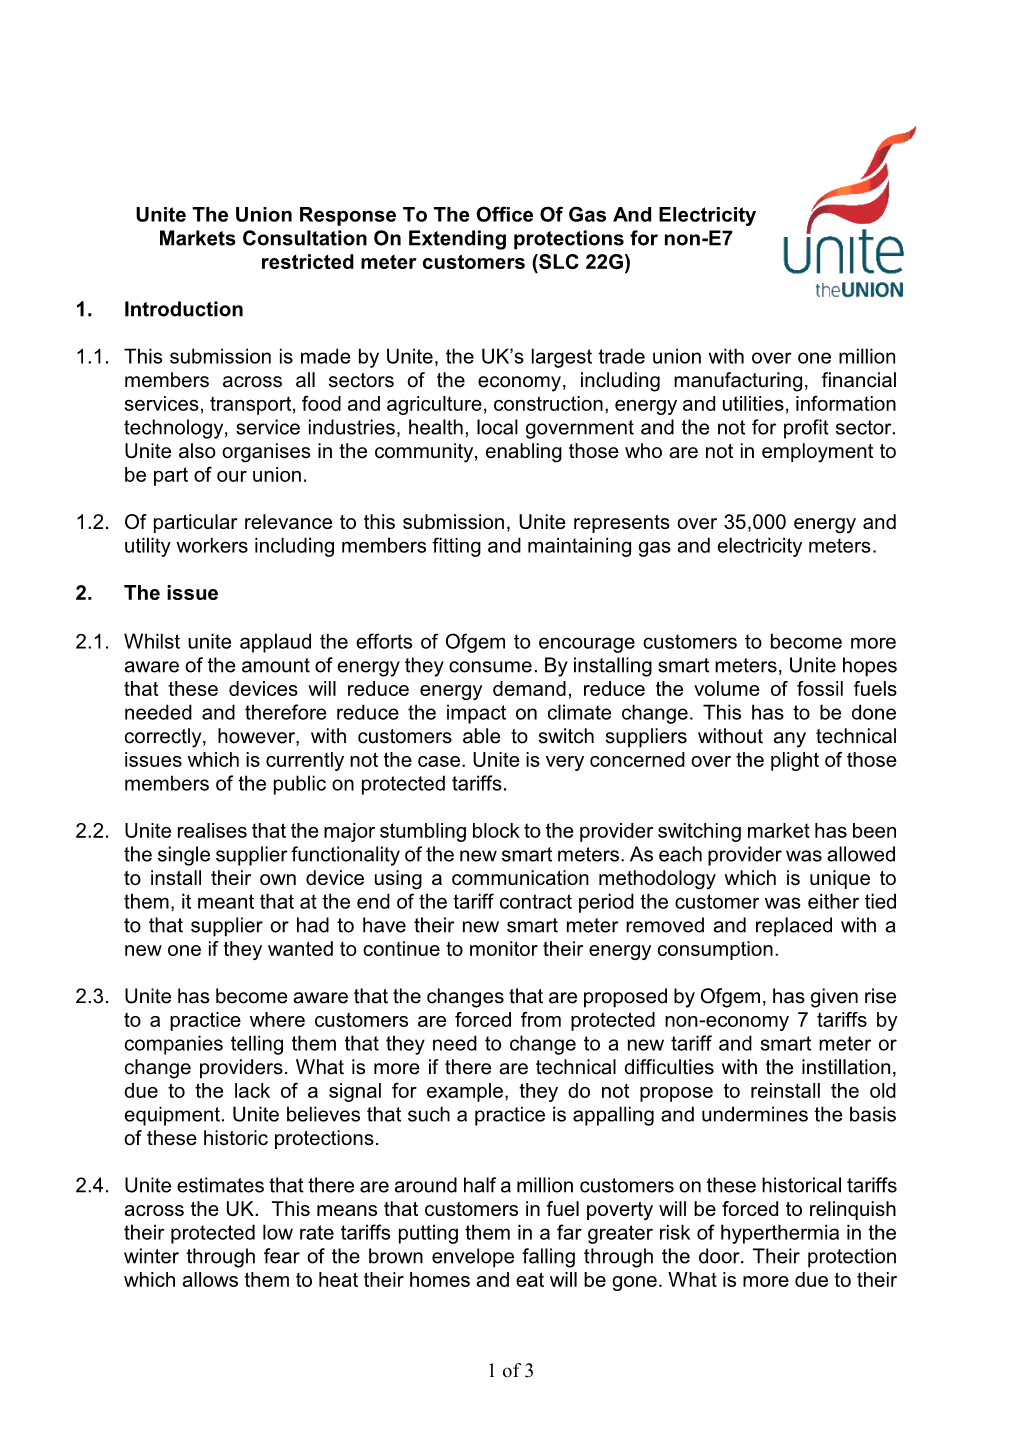 Unite the Union Response to the Office of Gas and Electricity Markets Consultation on Extending Protections for Non-E7 Restricted Meter Customers (SLC 22G)